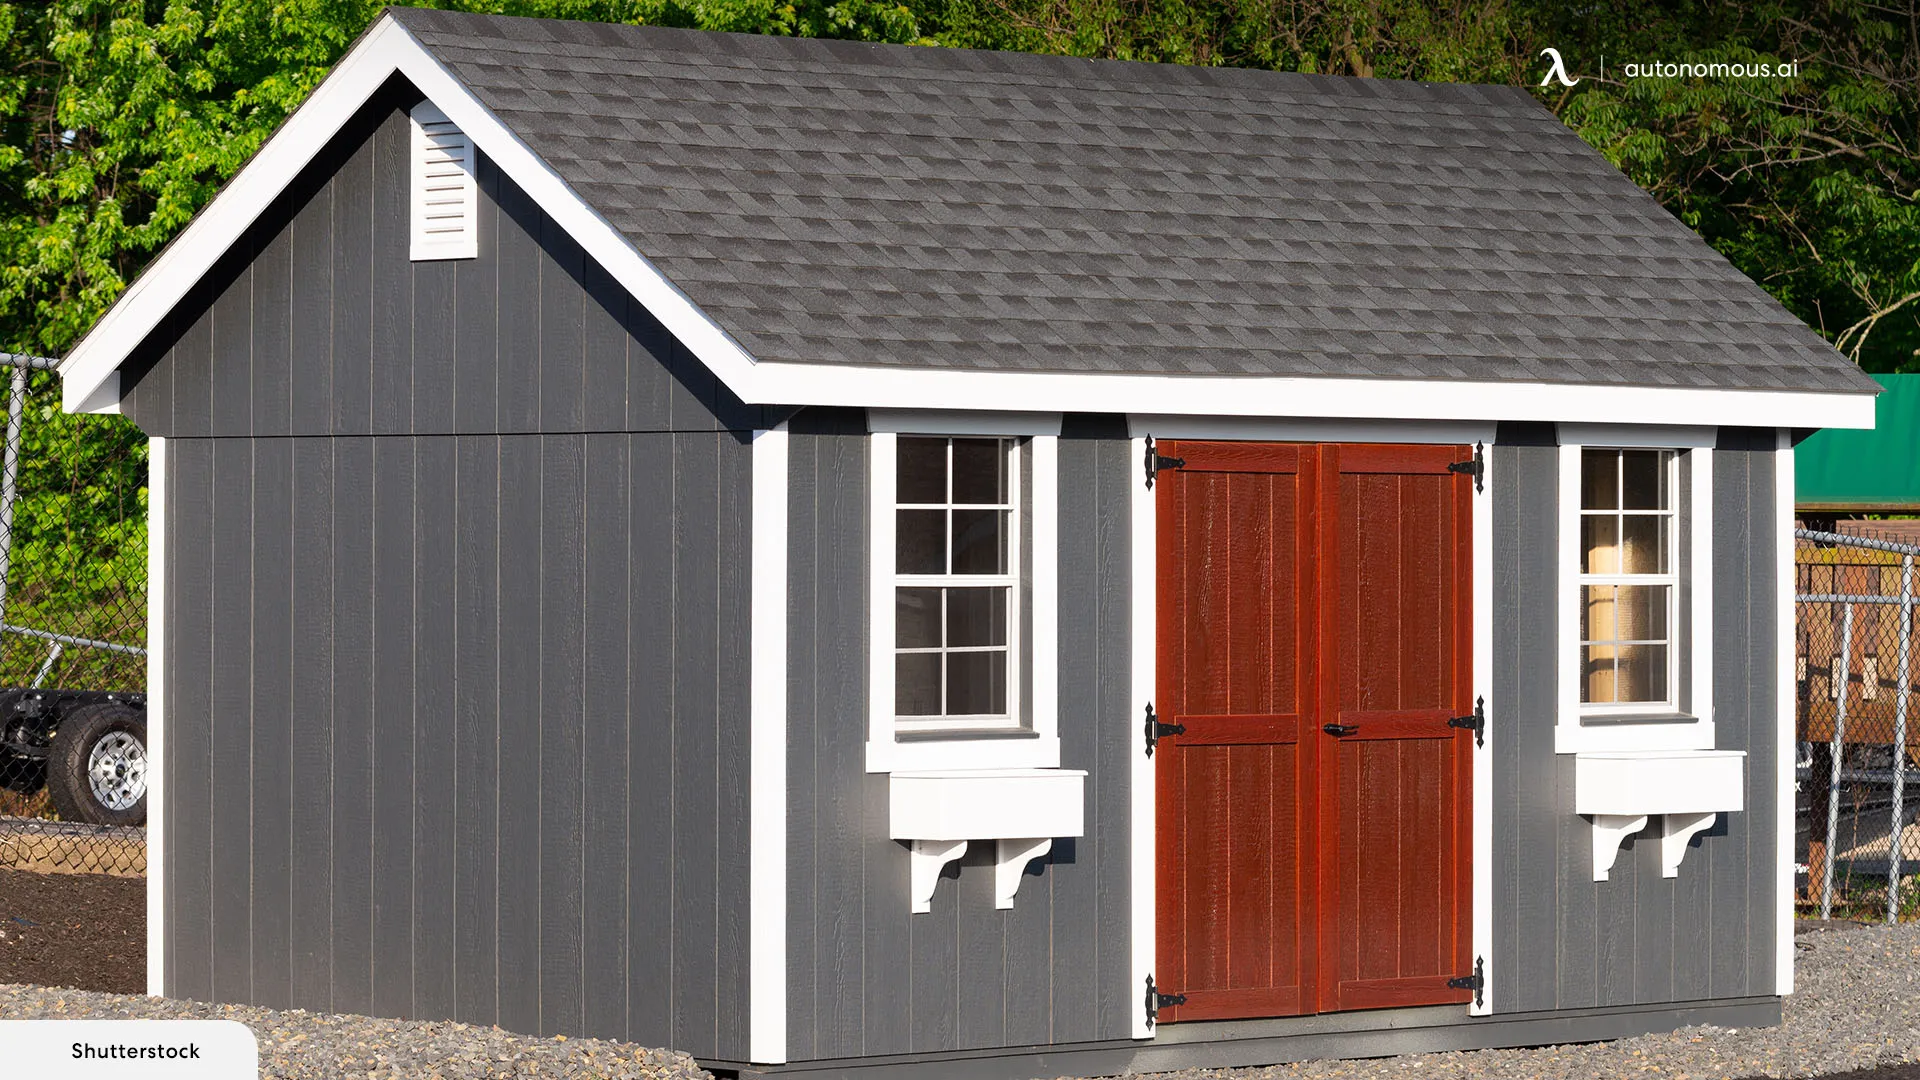 Factors to Consider When Selecting a Shed Supplier